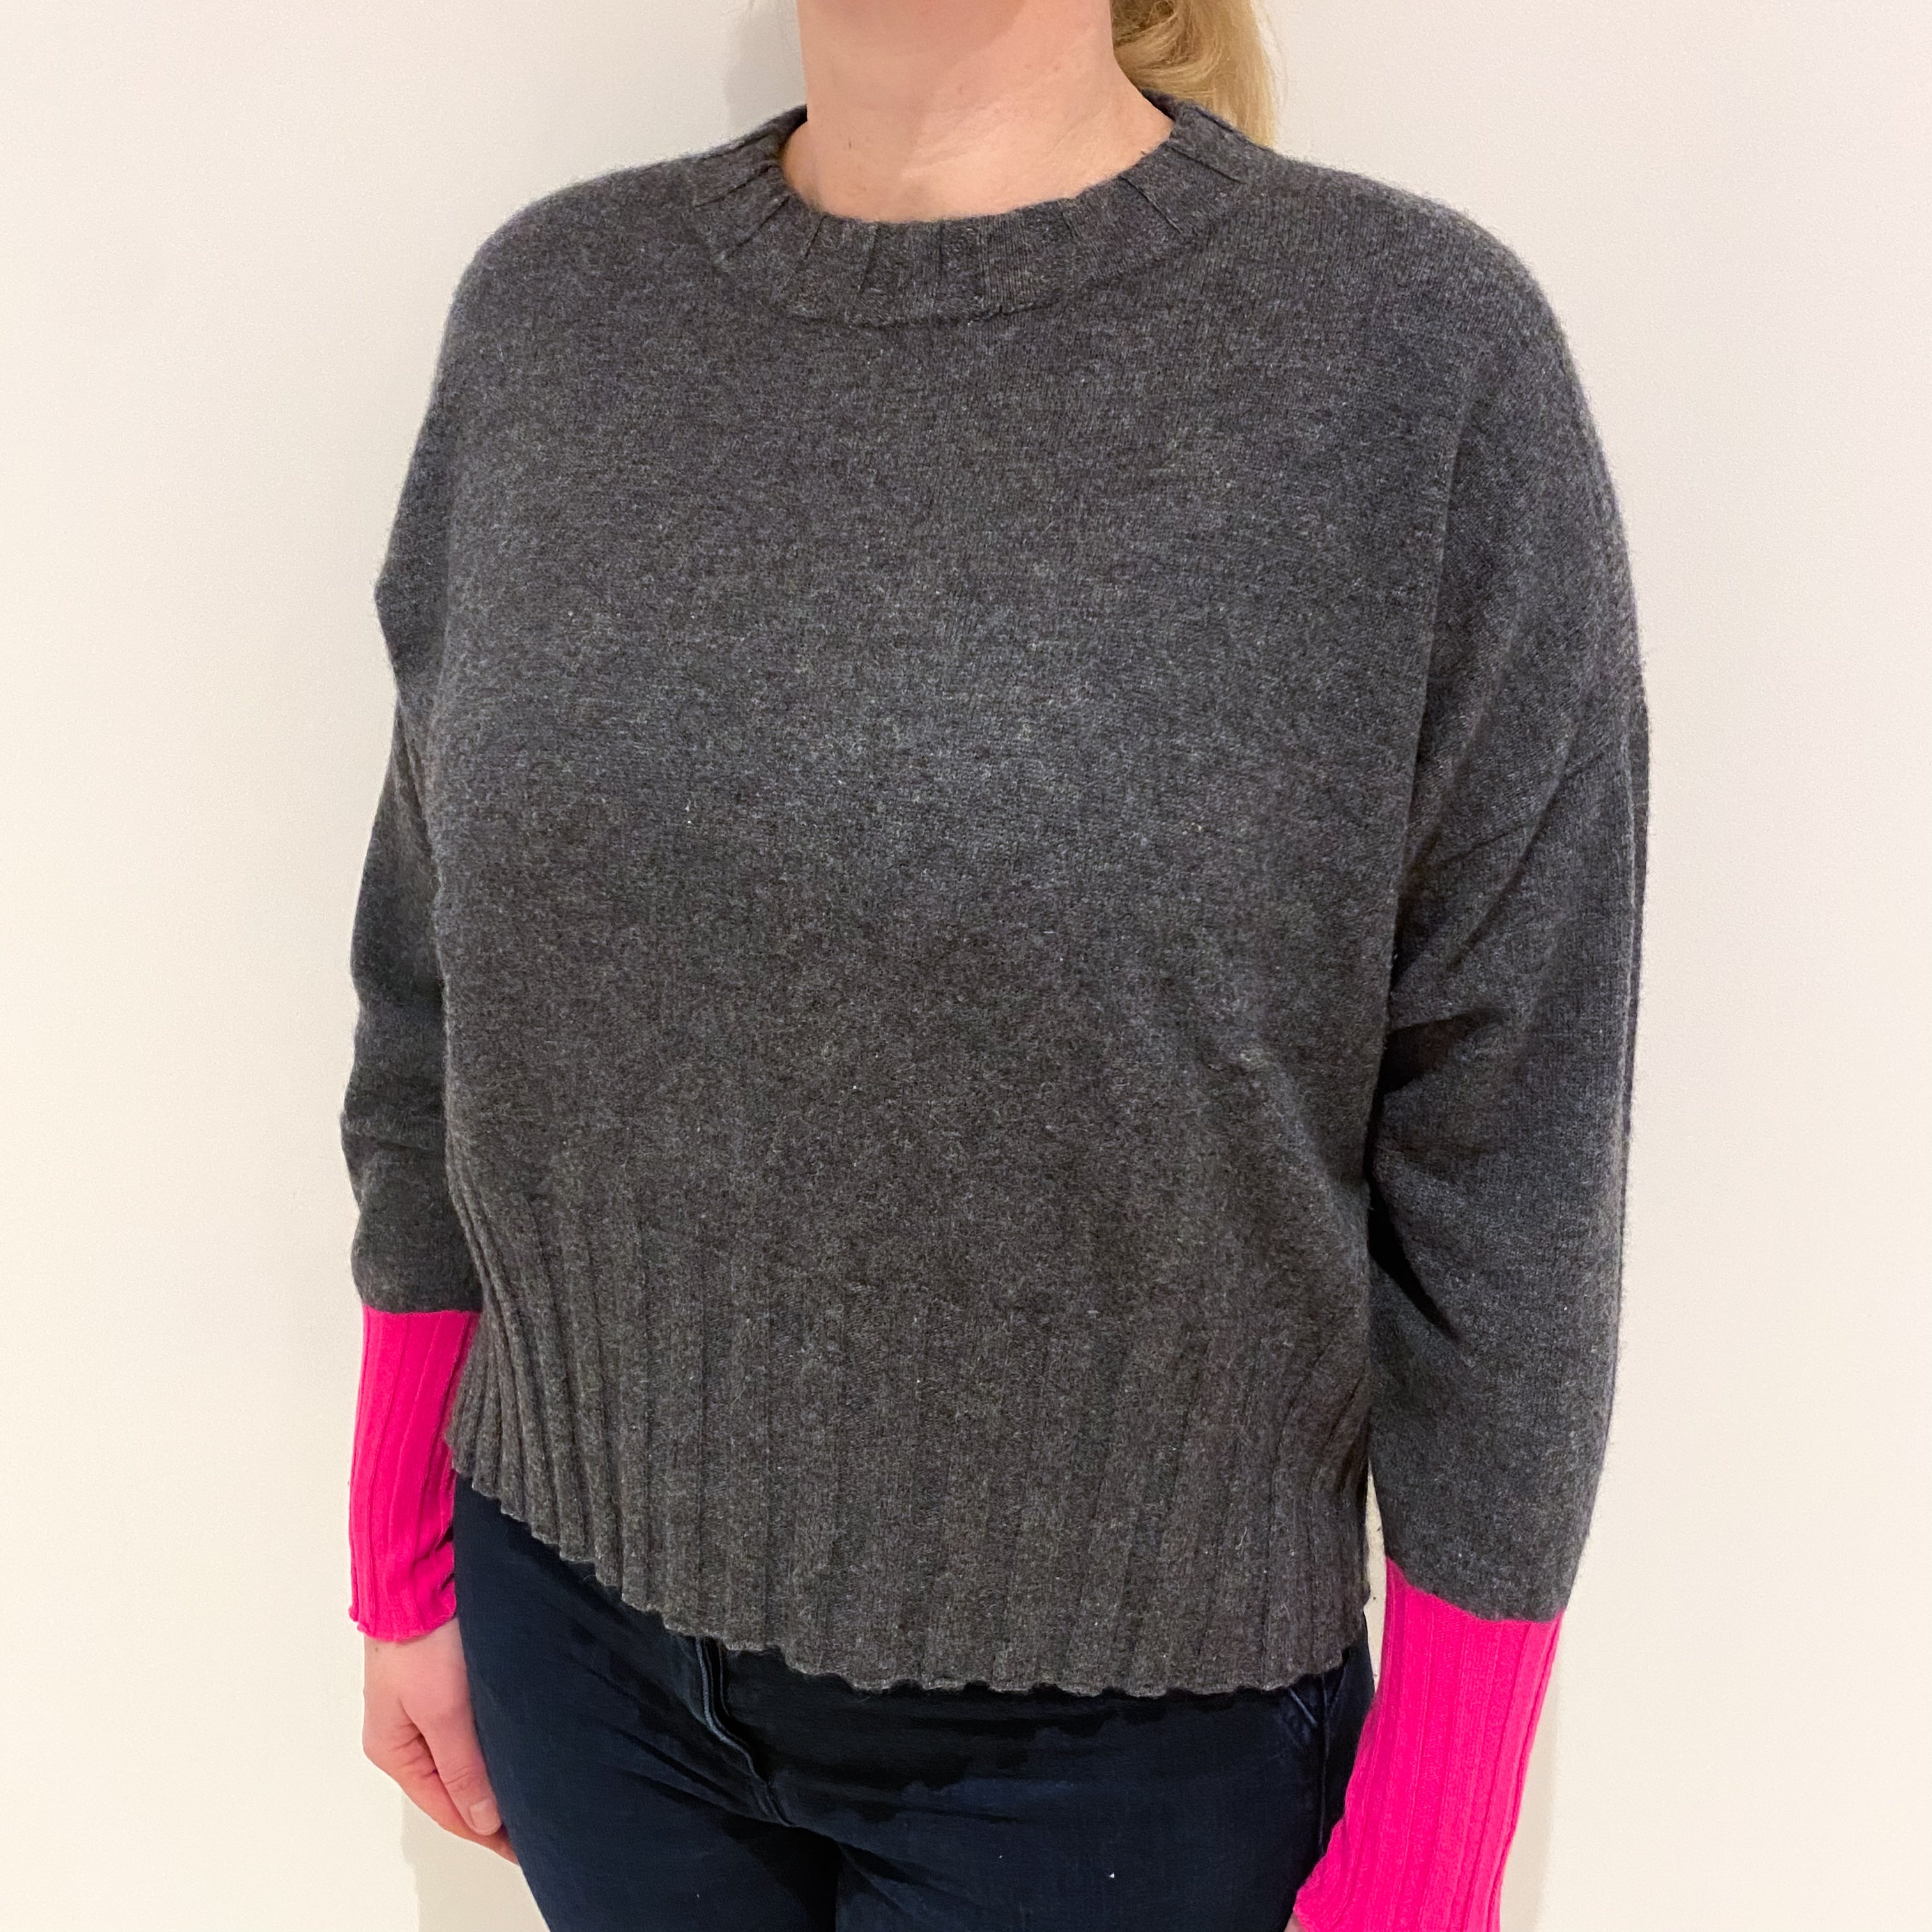 Slate Grey and Hot Pink Cashmere Crew Neck Jumper Large